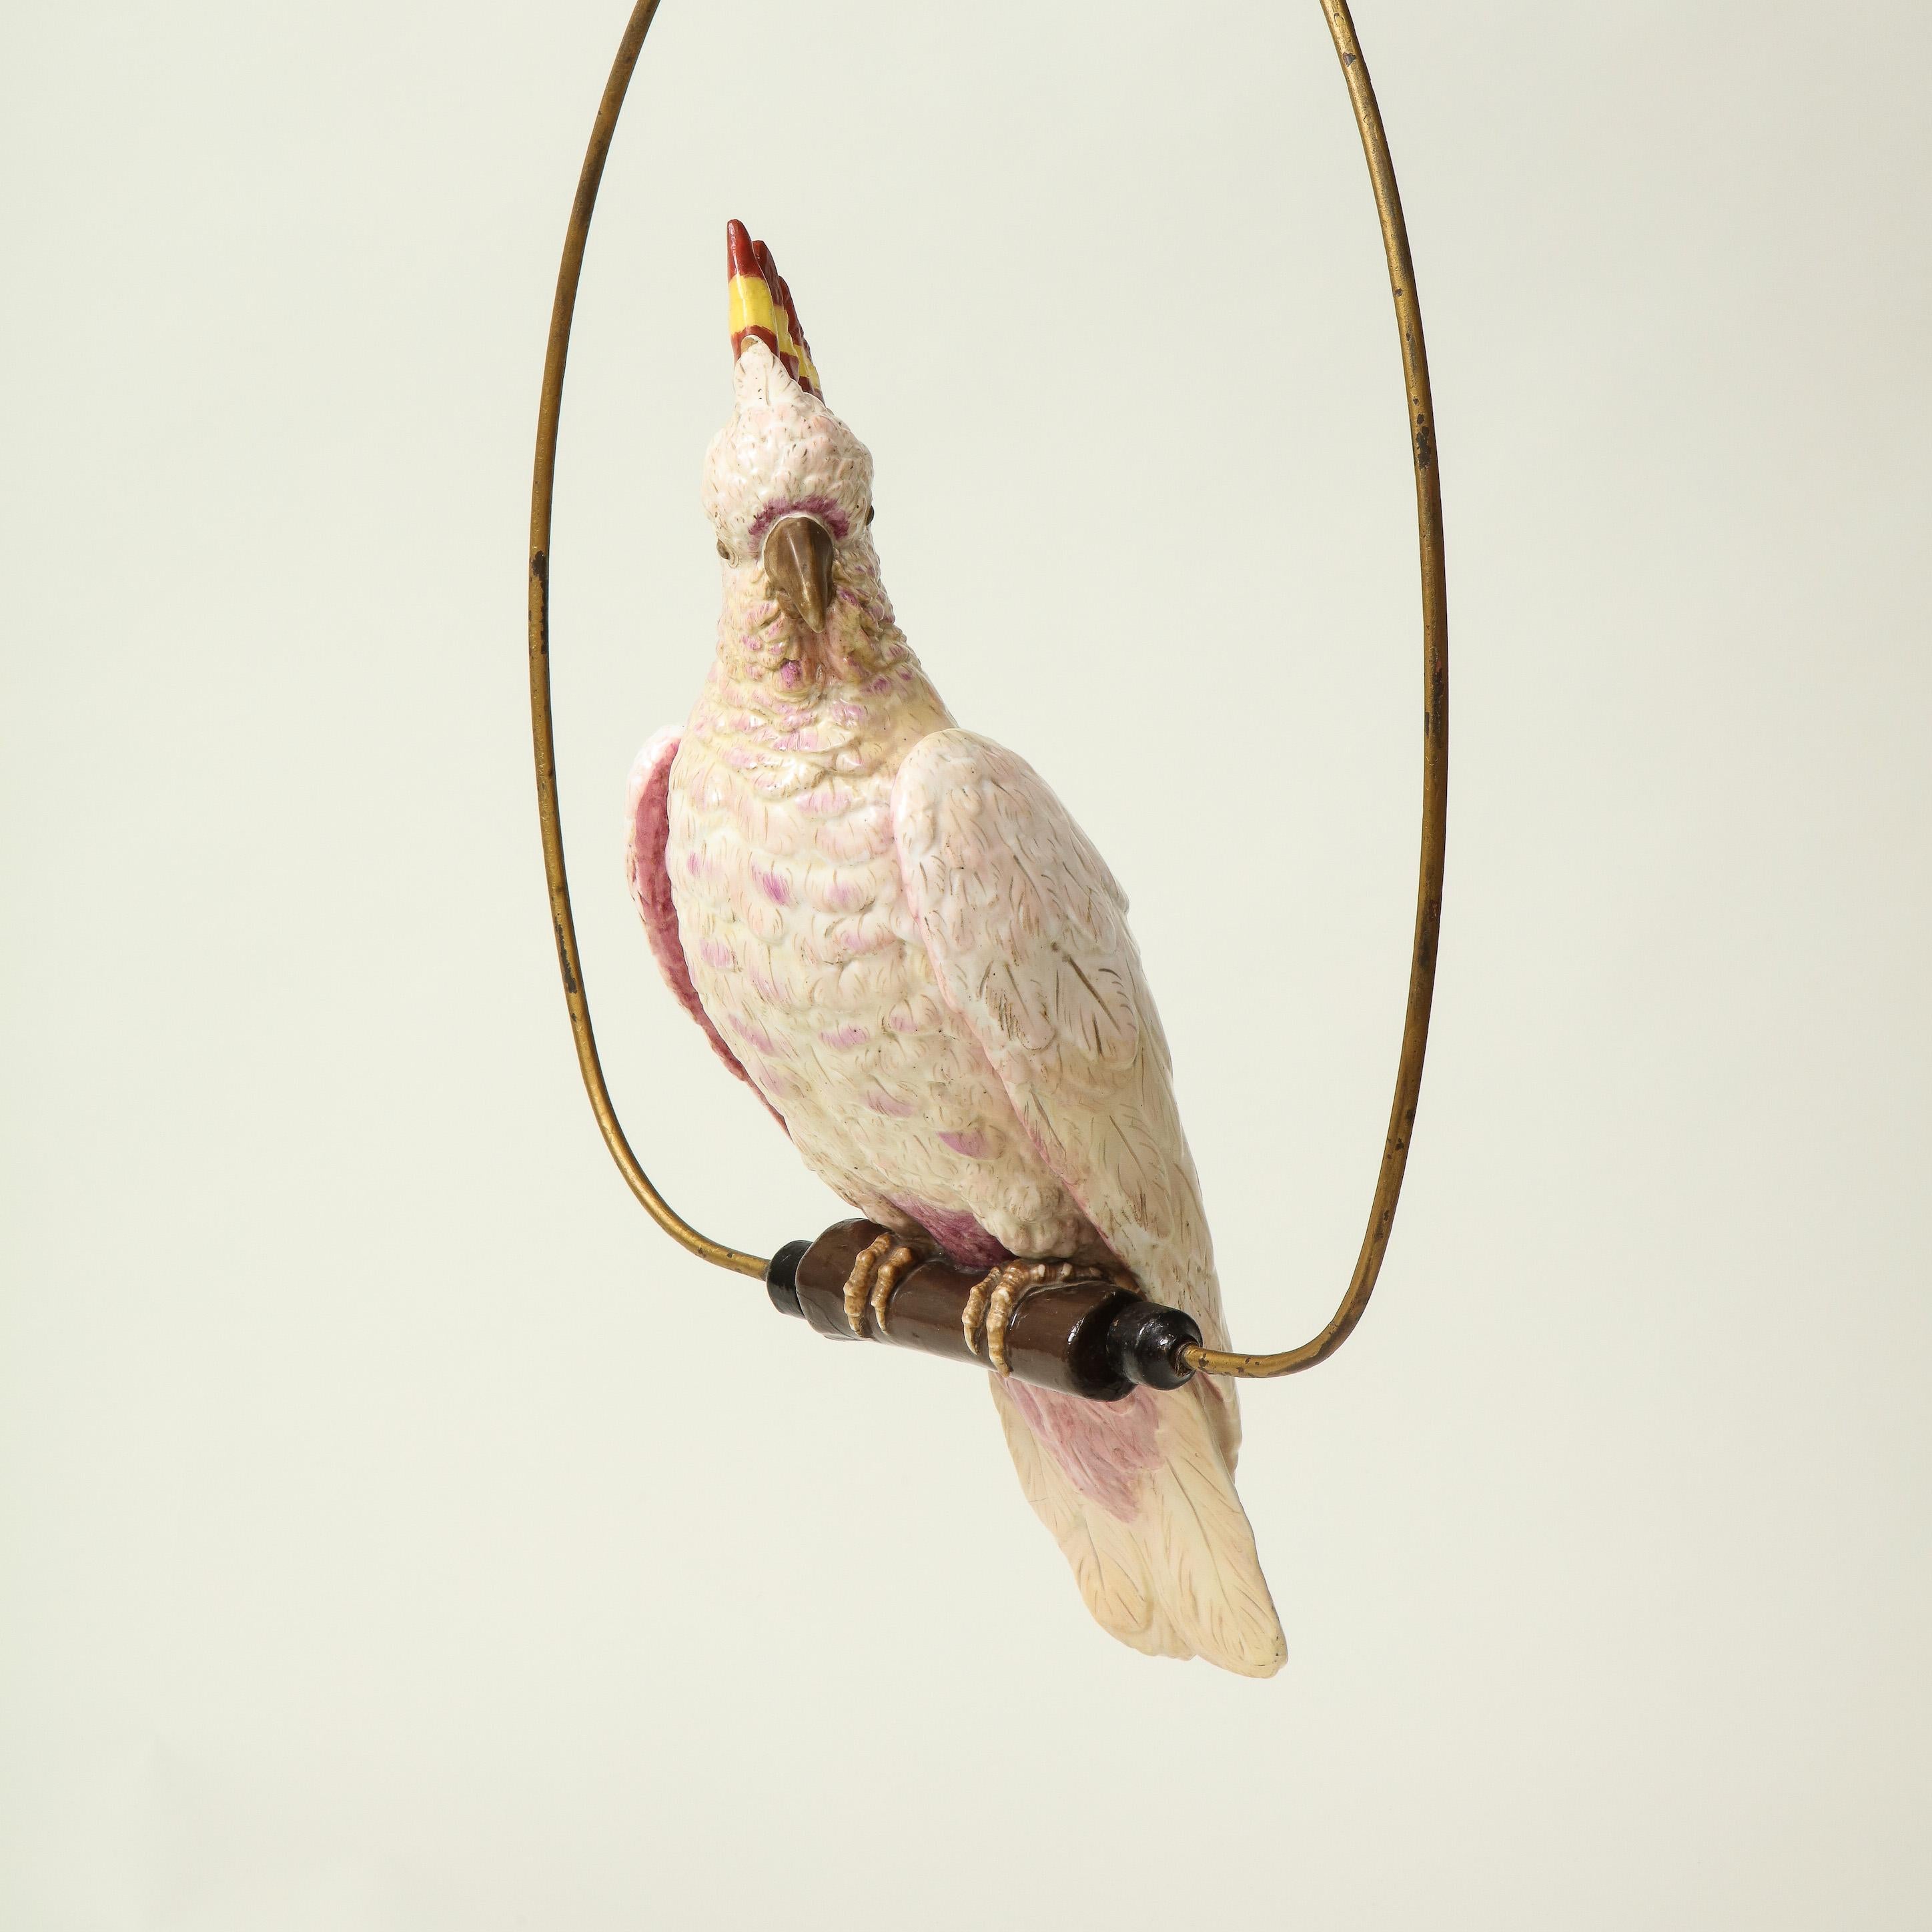 With white and lavender plumage and red and yellow-striped crest; perched on a wooden beam within a metal hoop. Note dimensions include hoop.

Provenance: From the Collection of Mario Buatta, New York, NY.